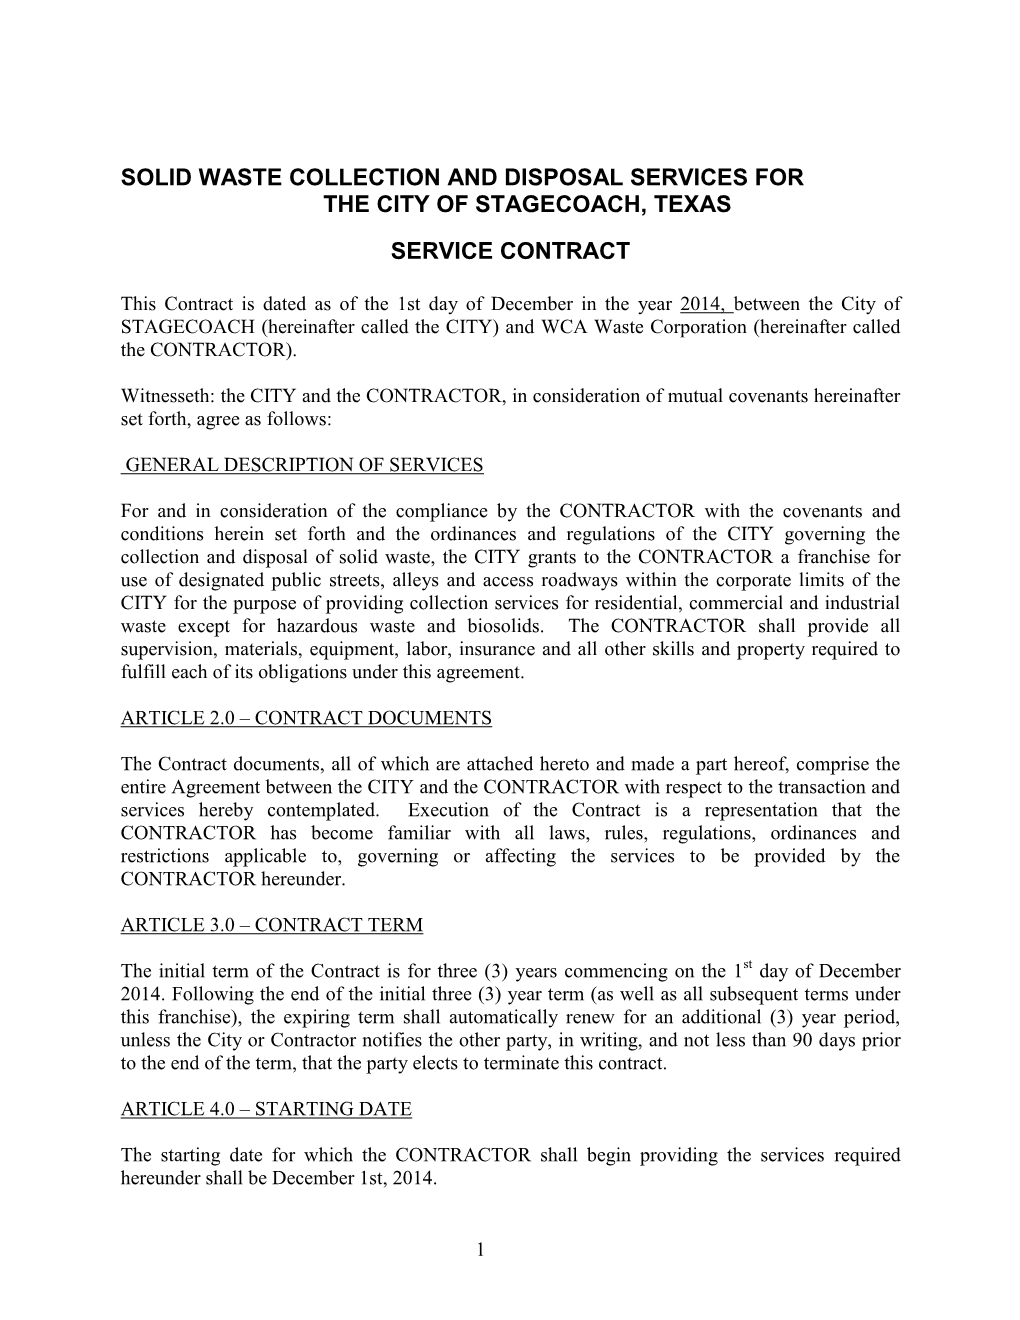 Solid Waste Collection and Disposal Services for the City of Stagecoach, Texas